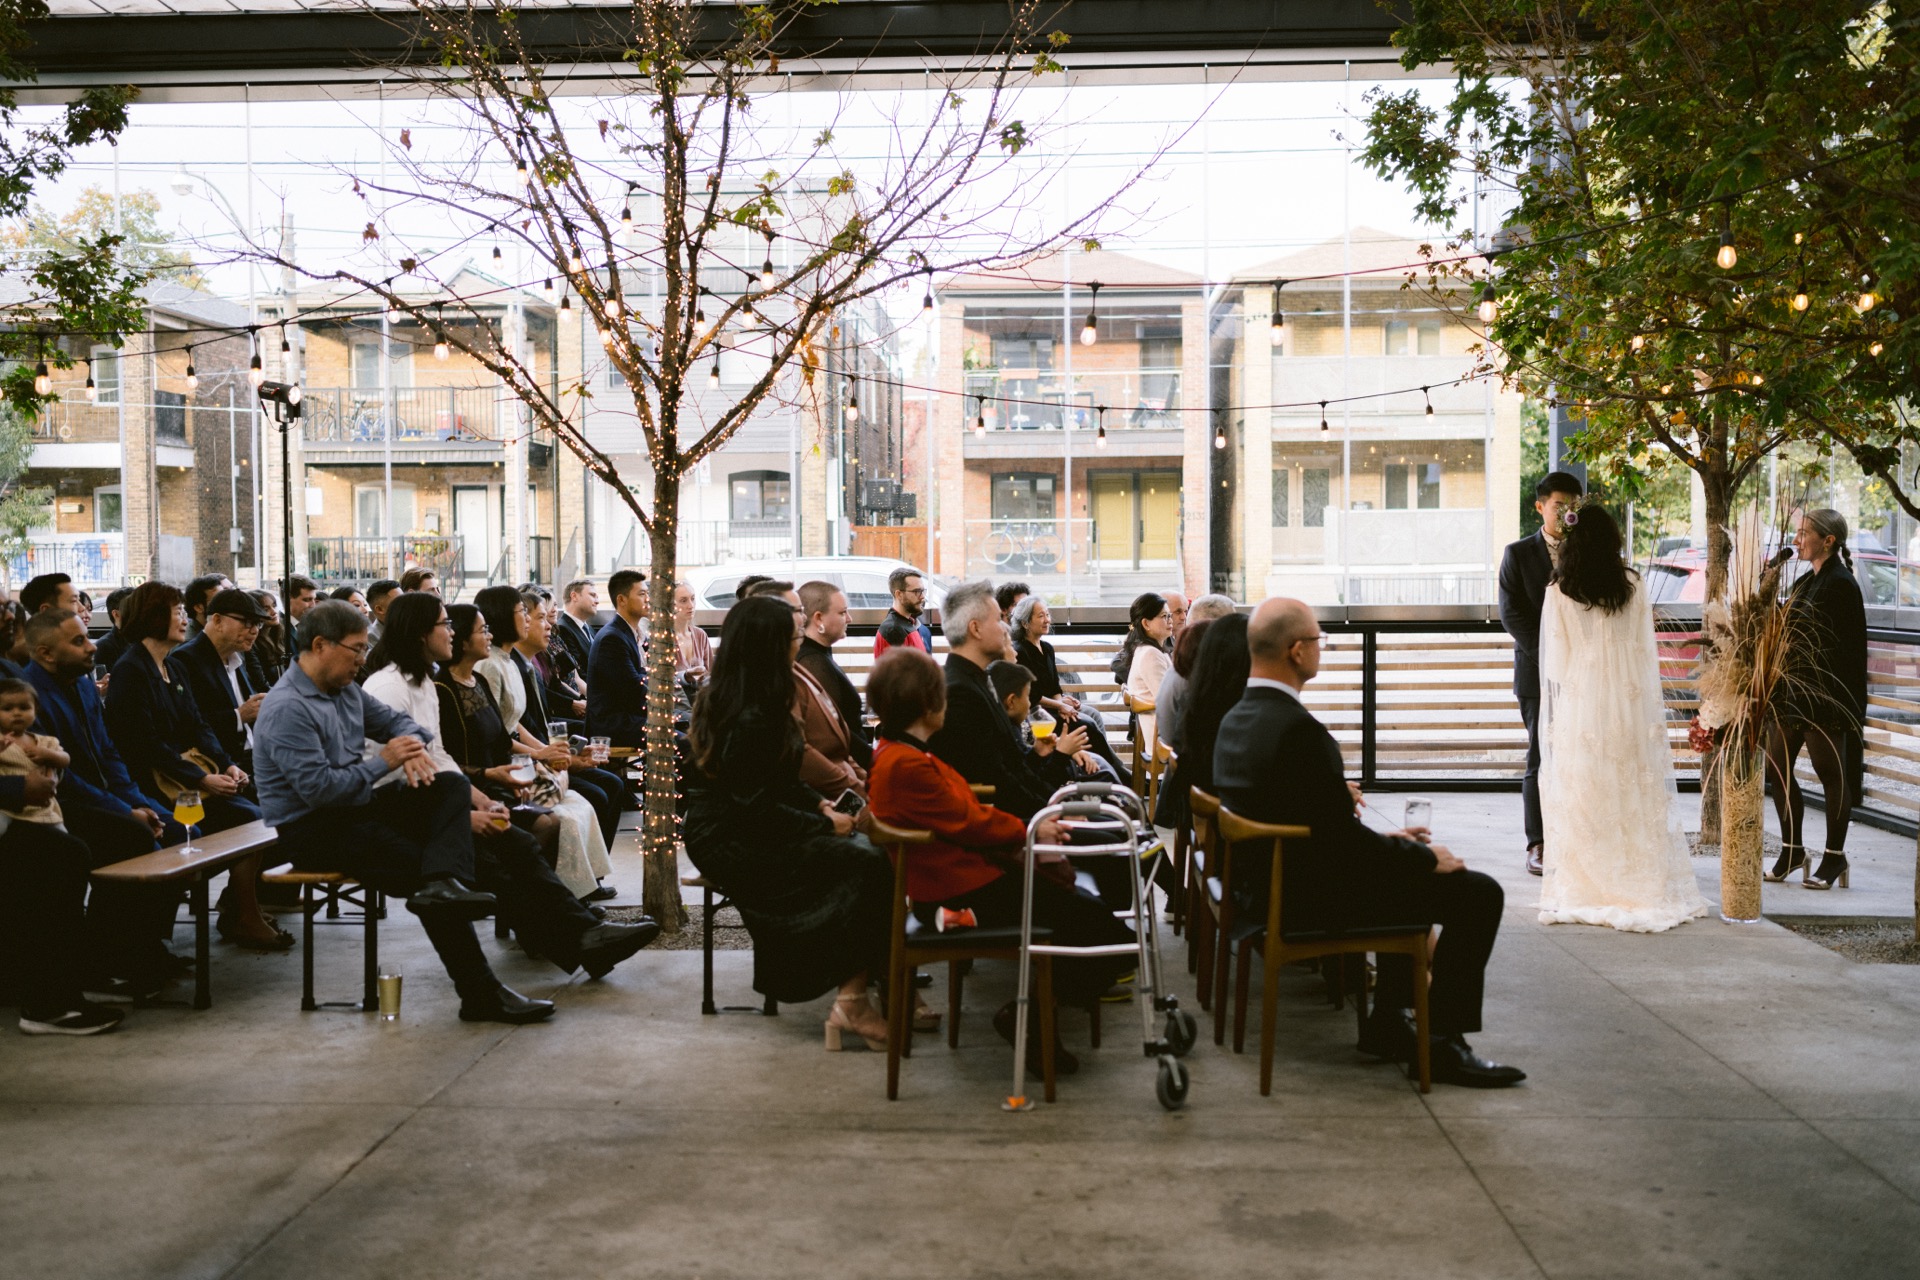 Outdoor micro-wedding ceremony with guests seated looking towards a couple standing at the altar